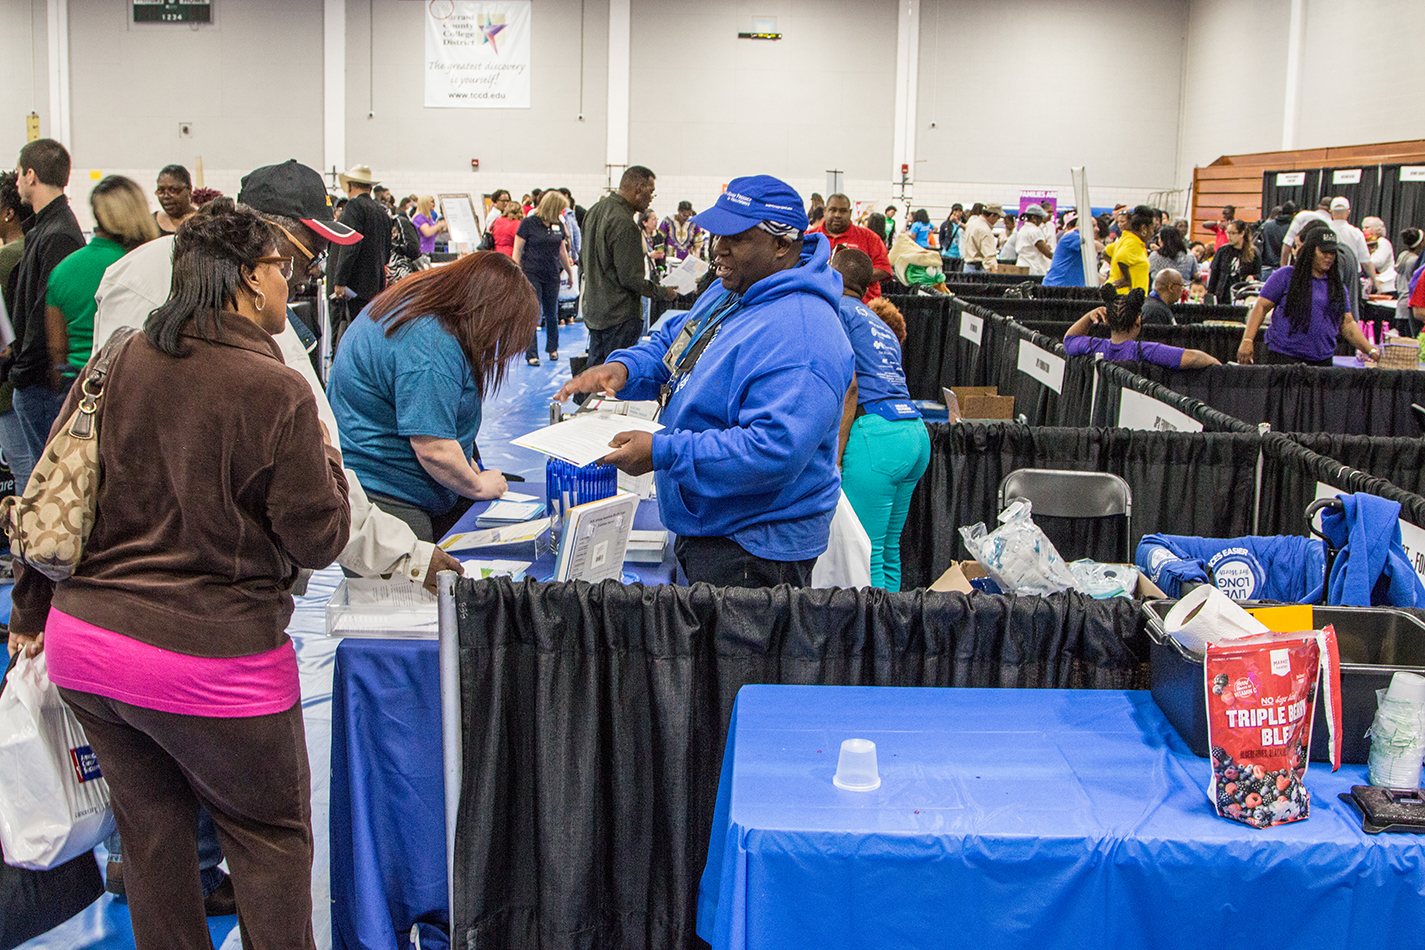 Despite the rain, community members flooded into South Campus’ gym to learn more about health, receive free screenings and learn how to cook healthy meals April 21.